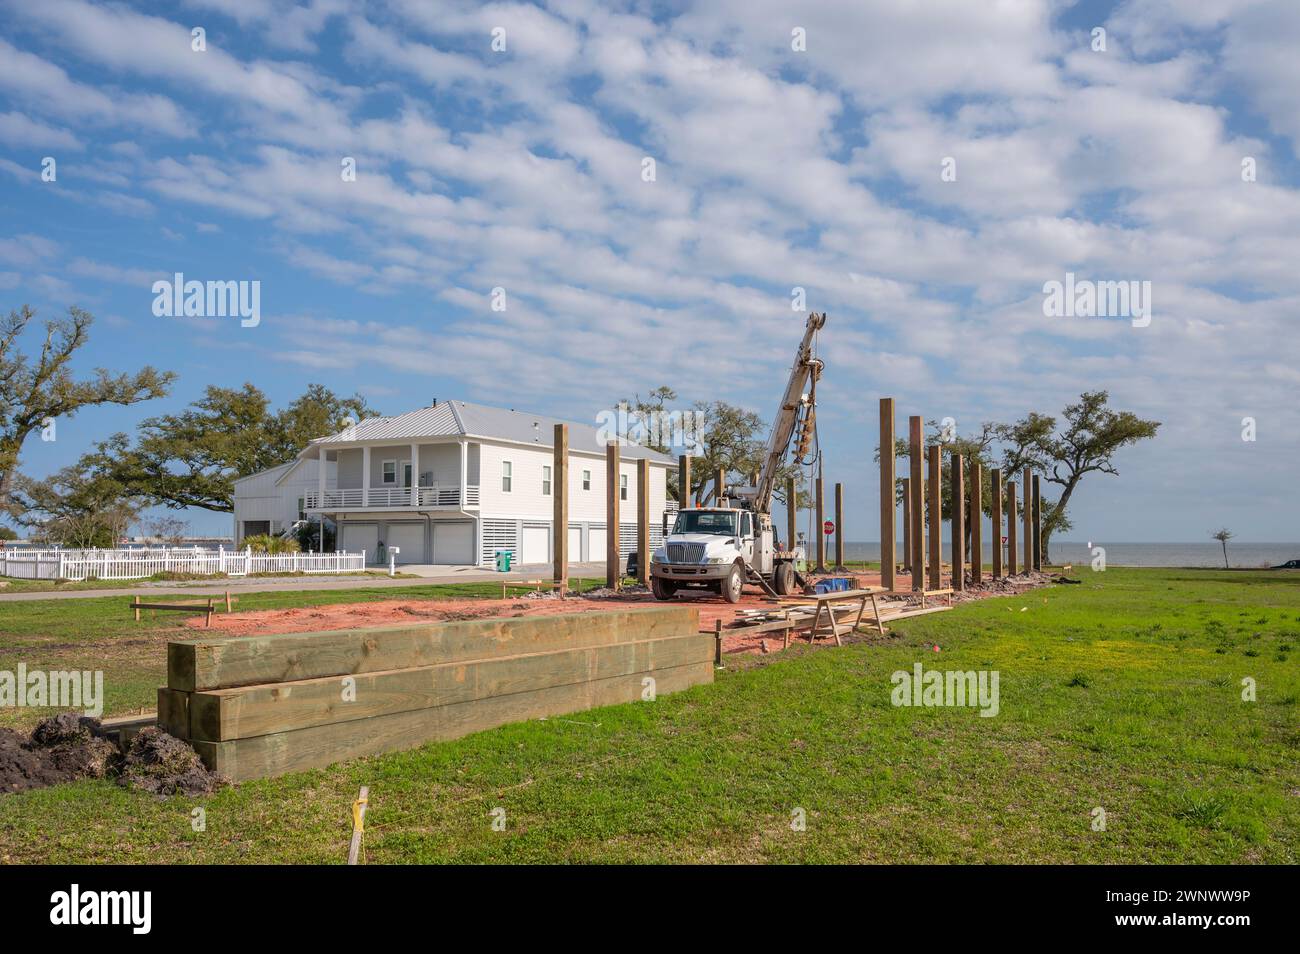 New home construction of elevated beach houses on stilts or piers to prevent flooding, Mississippi Gulf Coast, USA. Stock Photo